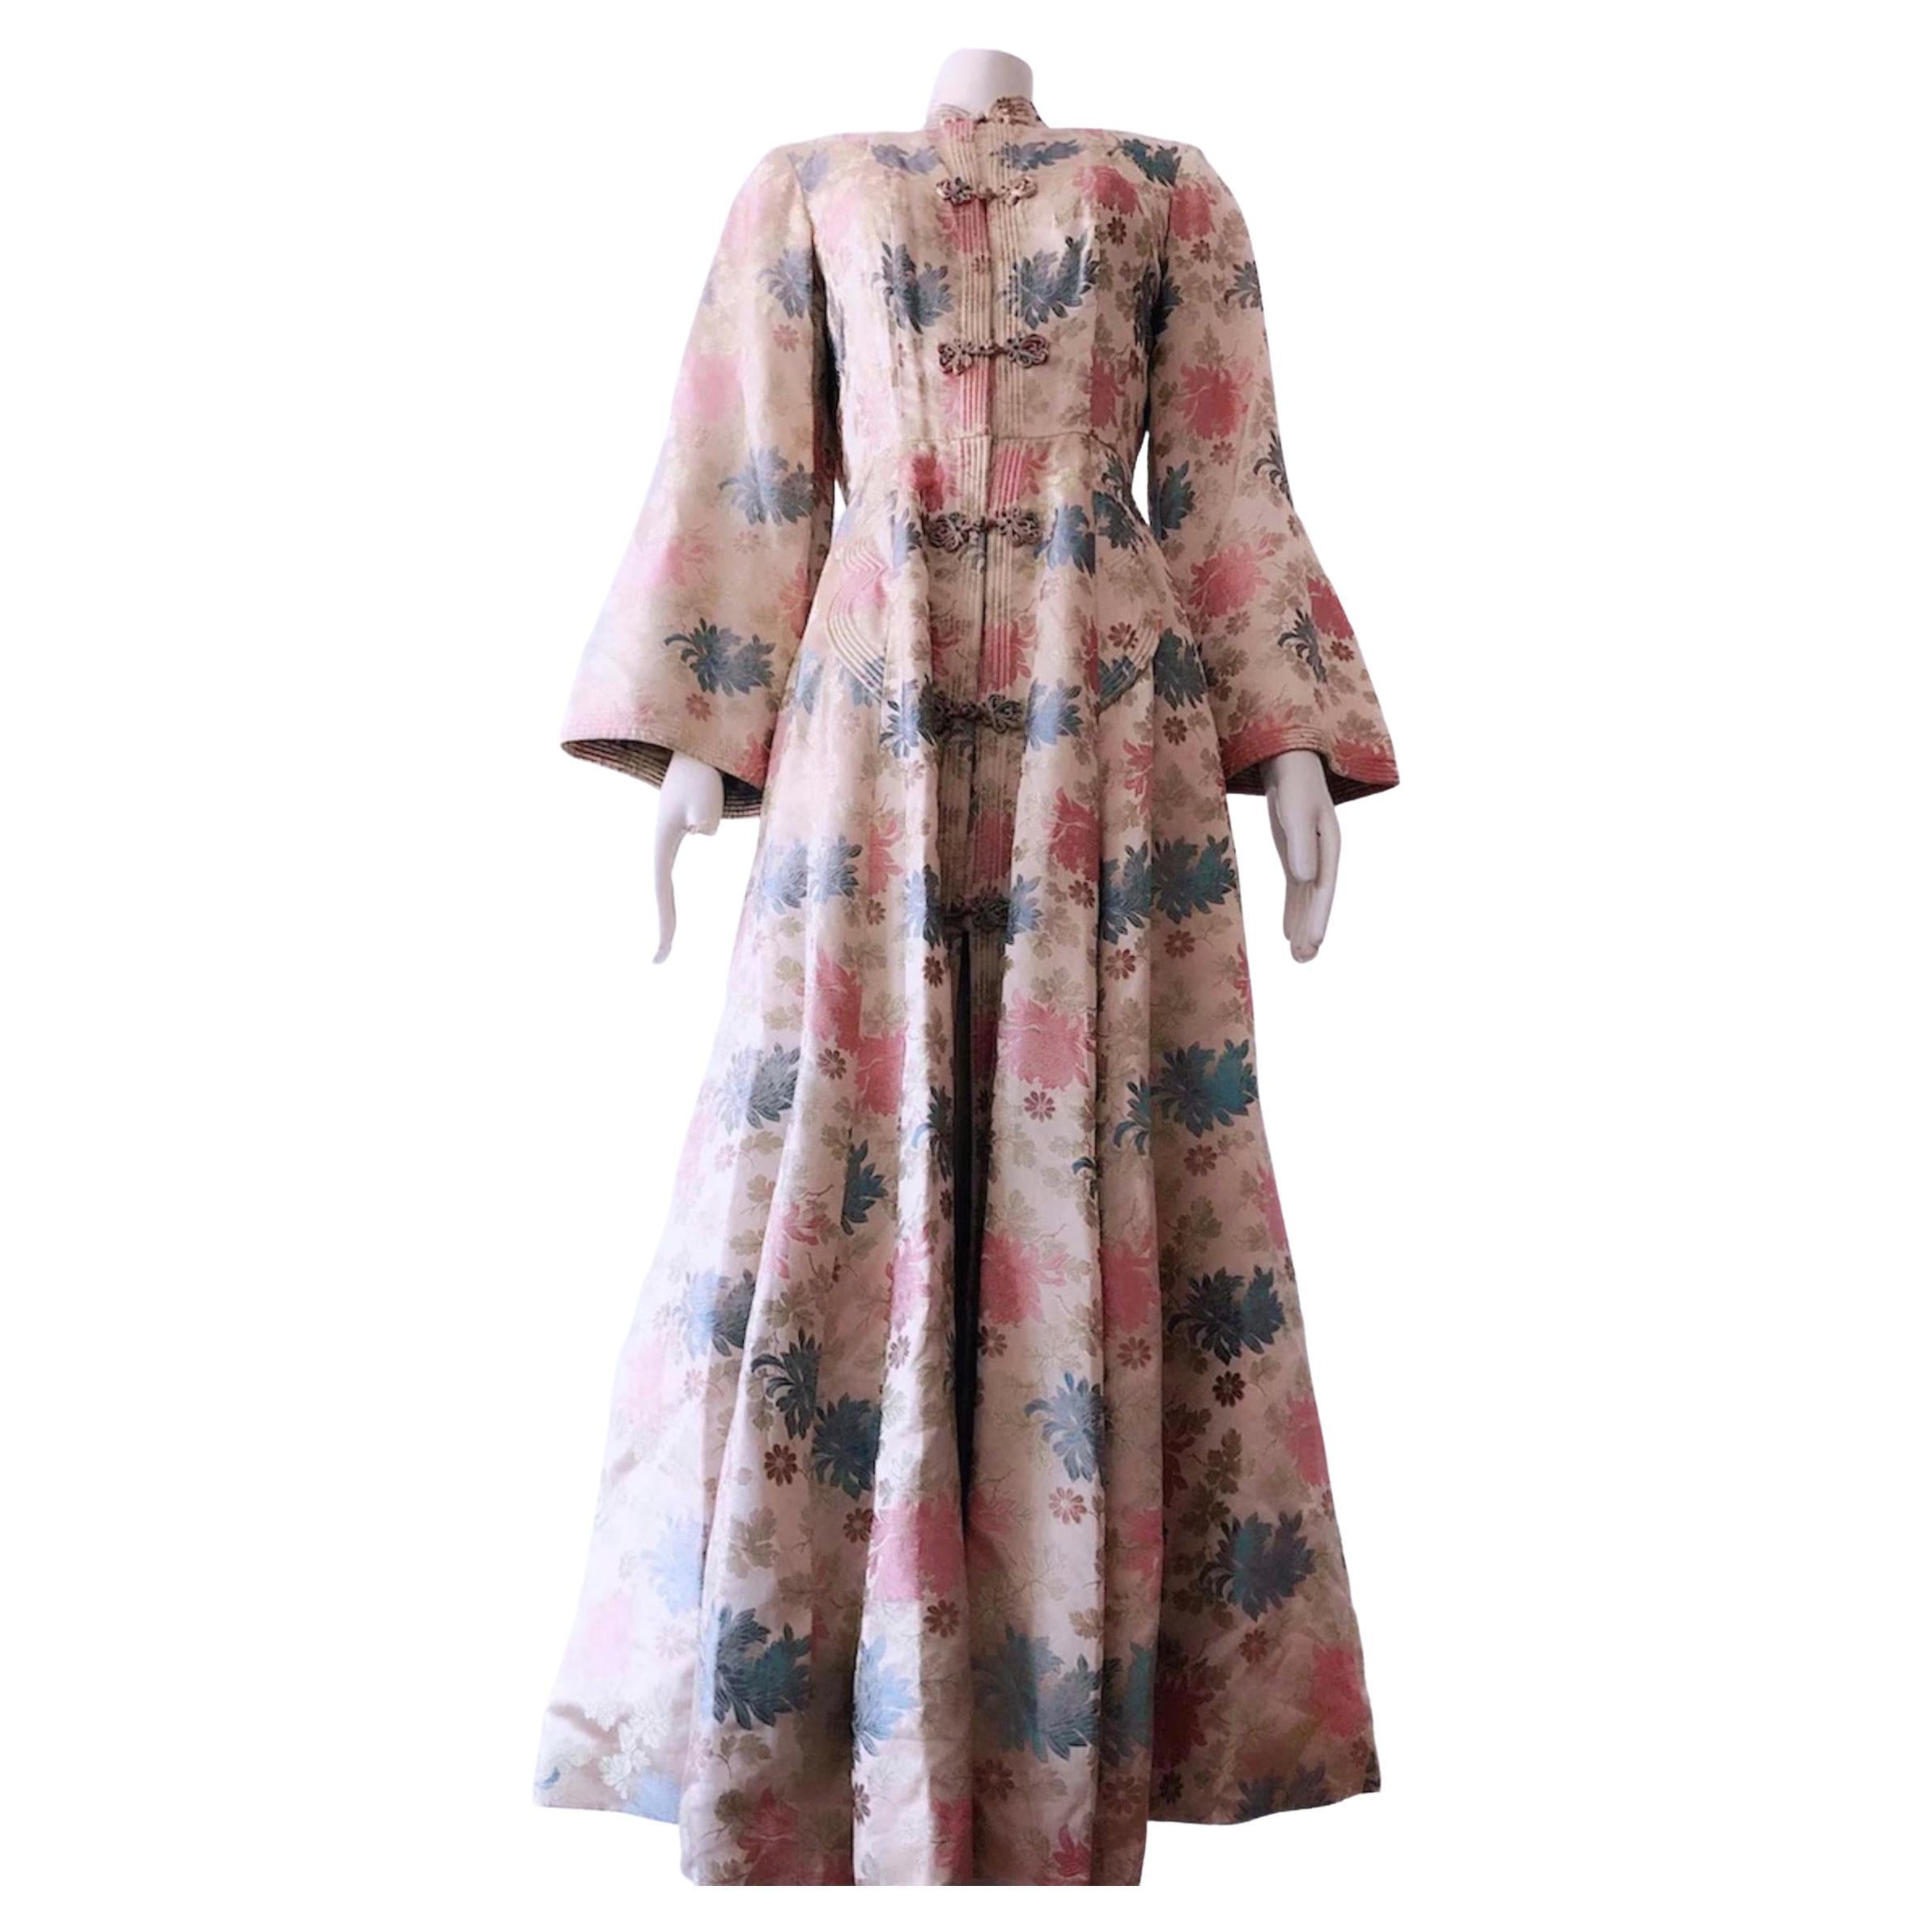 Beautiful Vintage Silk Kimono Dress Gown 1950s Couture Asian Robe Coat 40s 50s For Sale